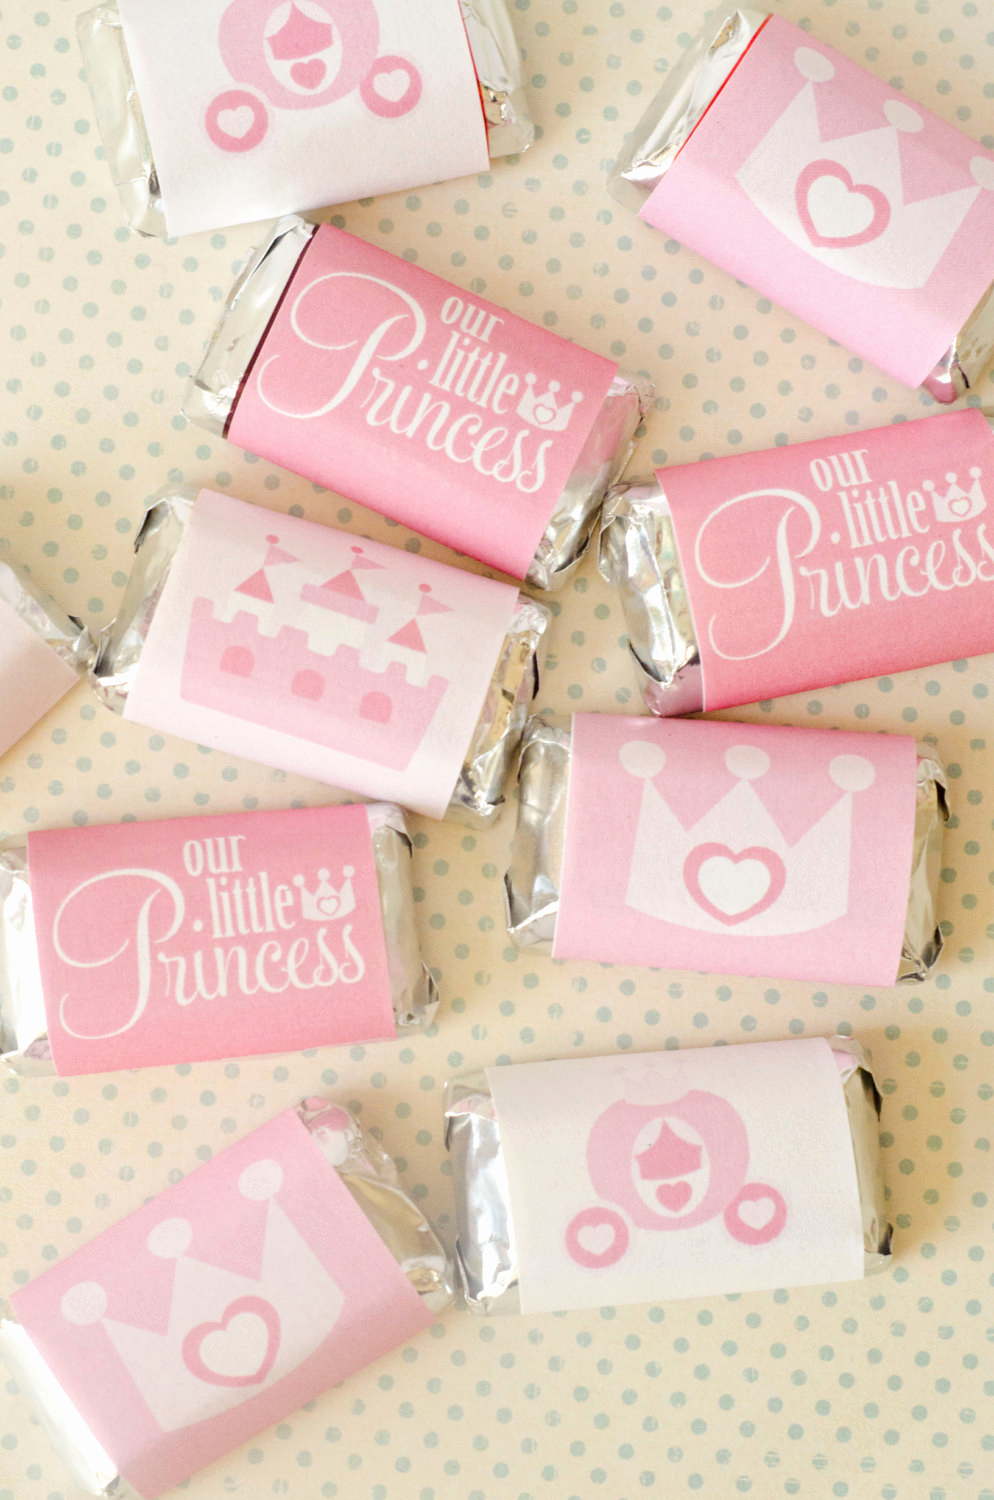 Printable Candy Bar Wrappers Beautiful Princess Party Printables Mini Candy Bar Wrappers Instant